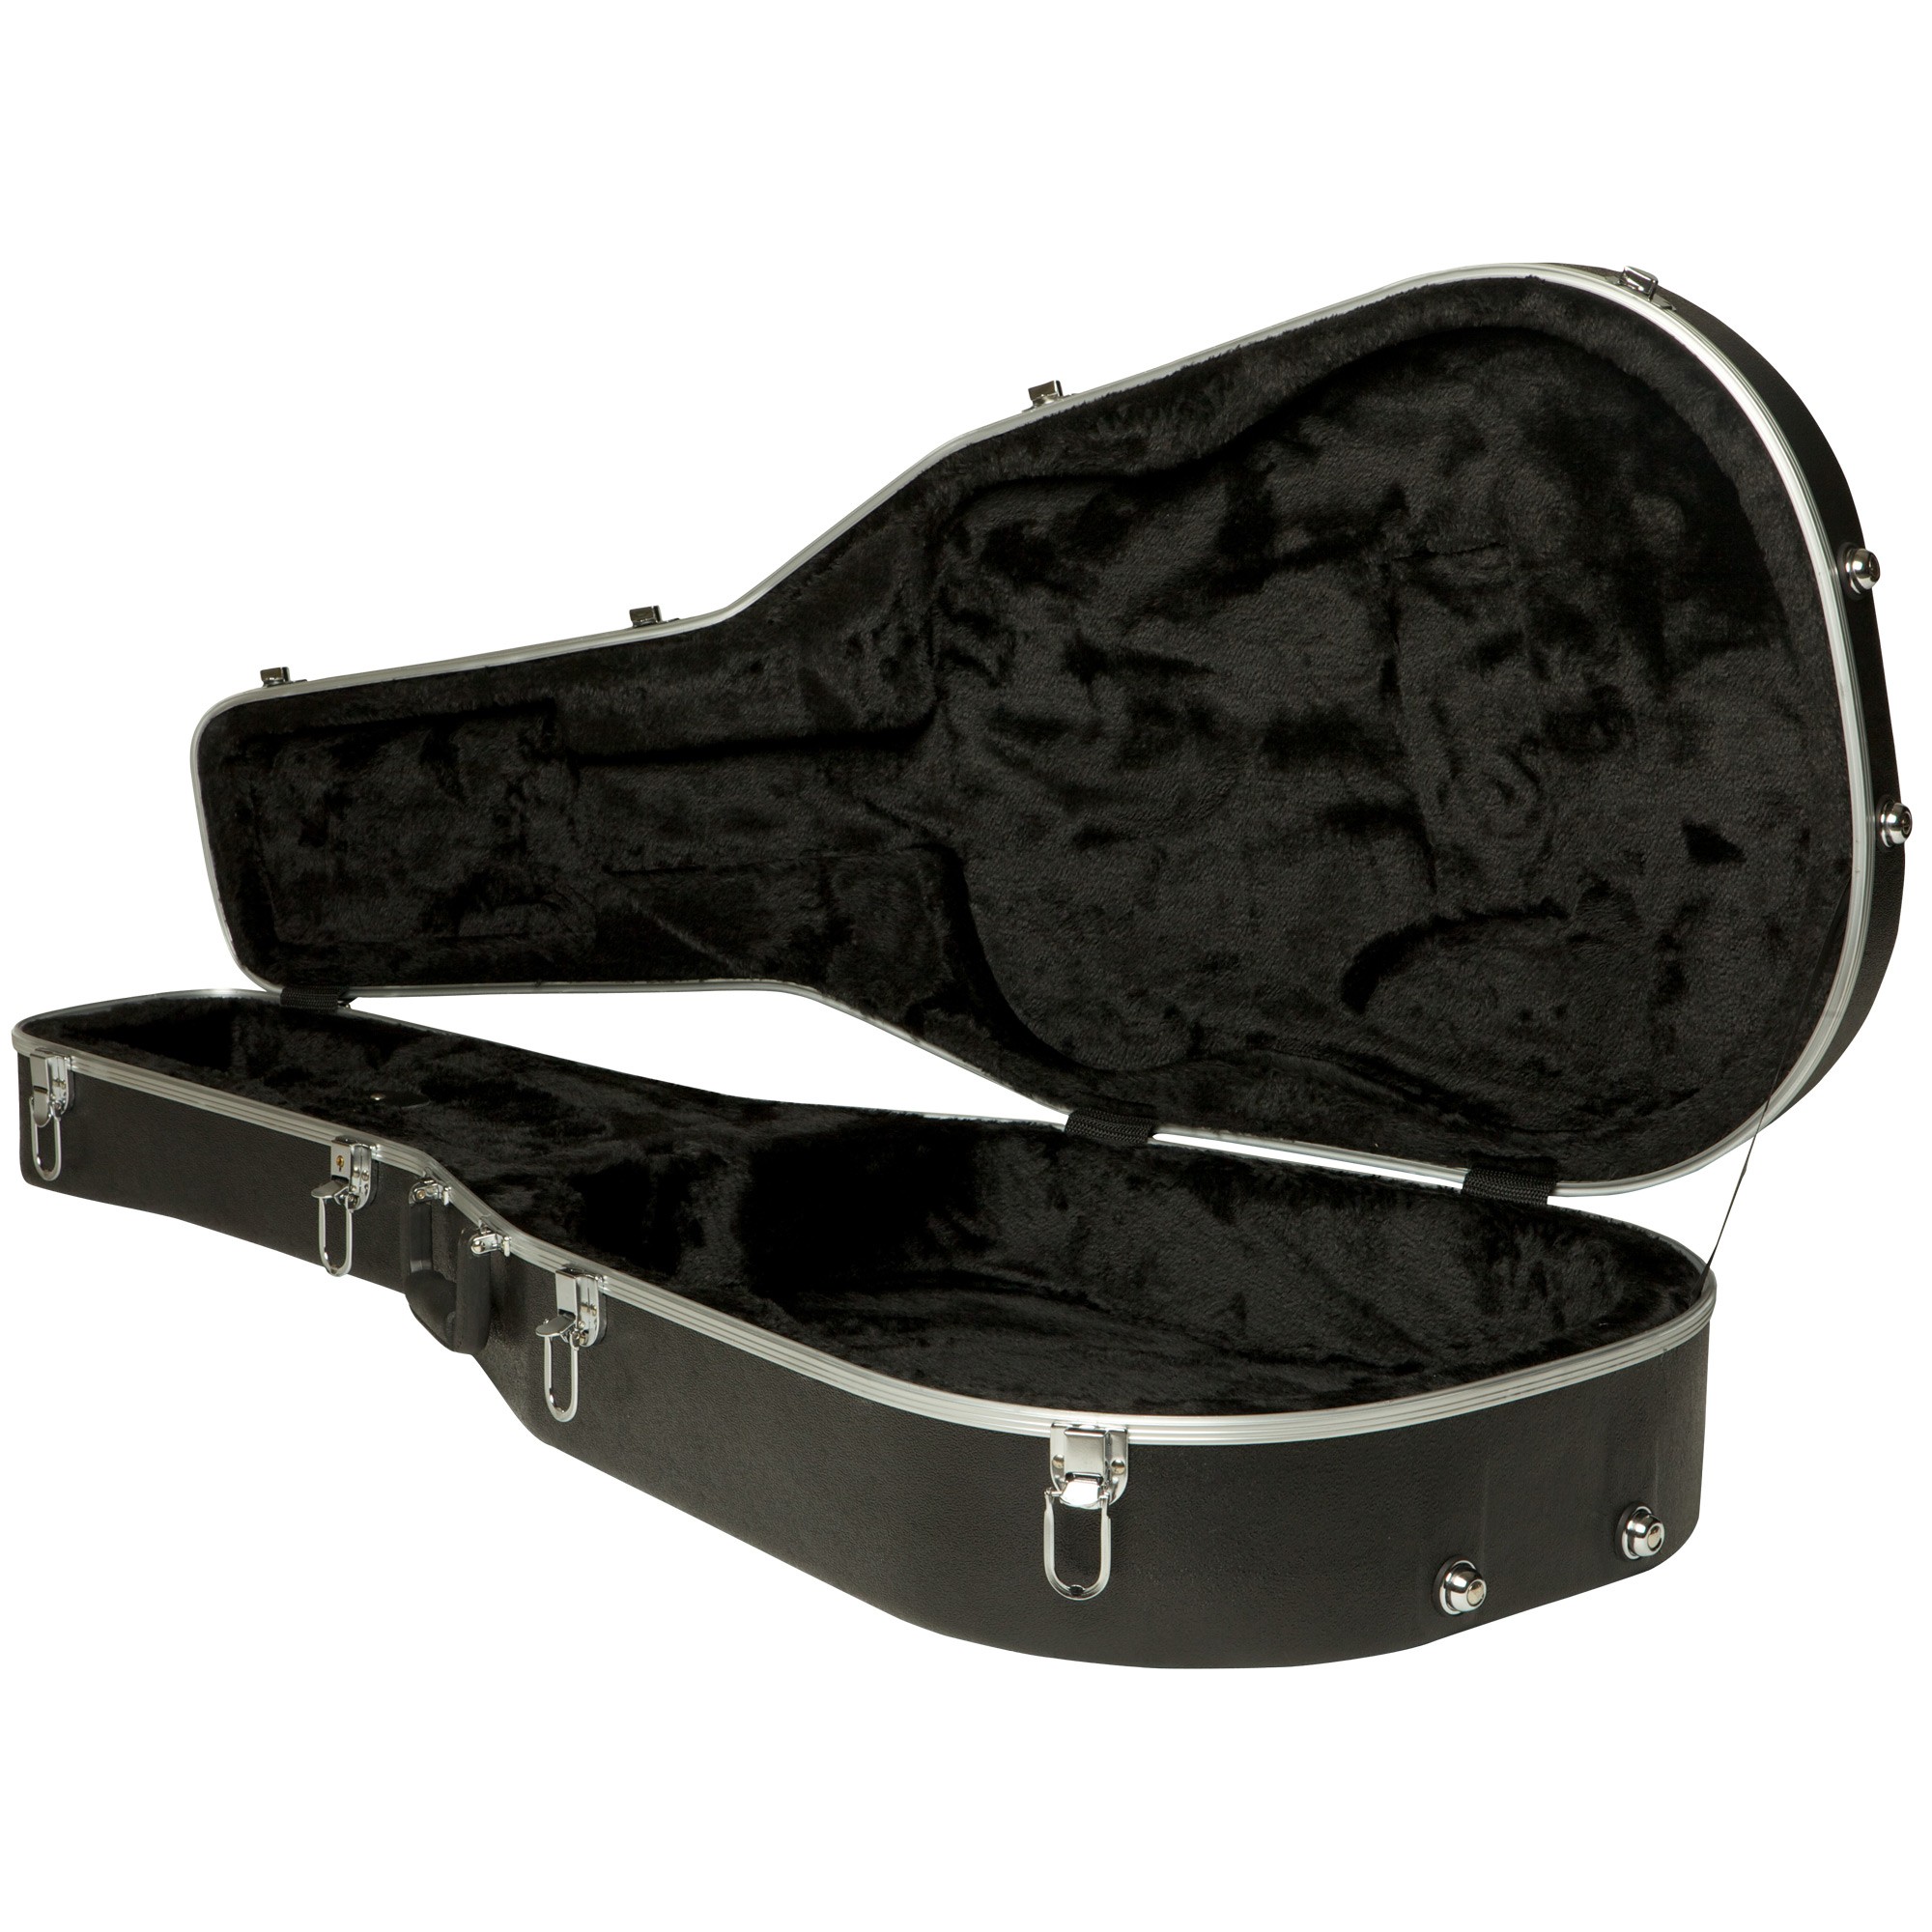 Southwest Strings Thermoplastic Dreadnought Guitar Case